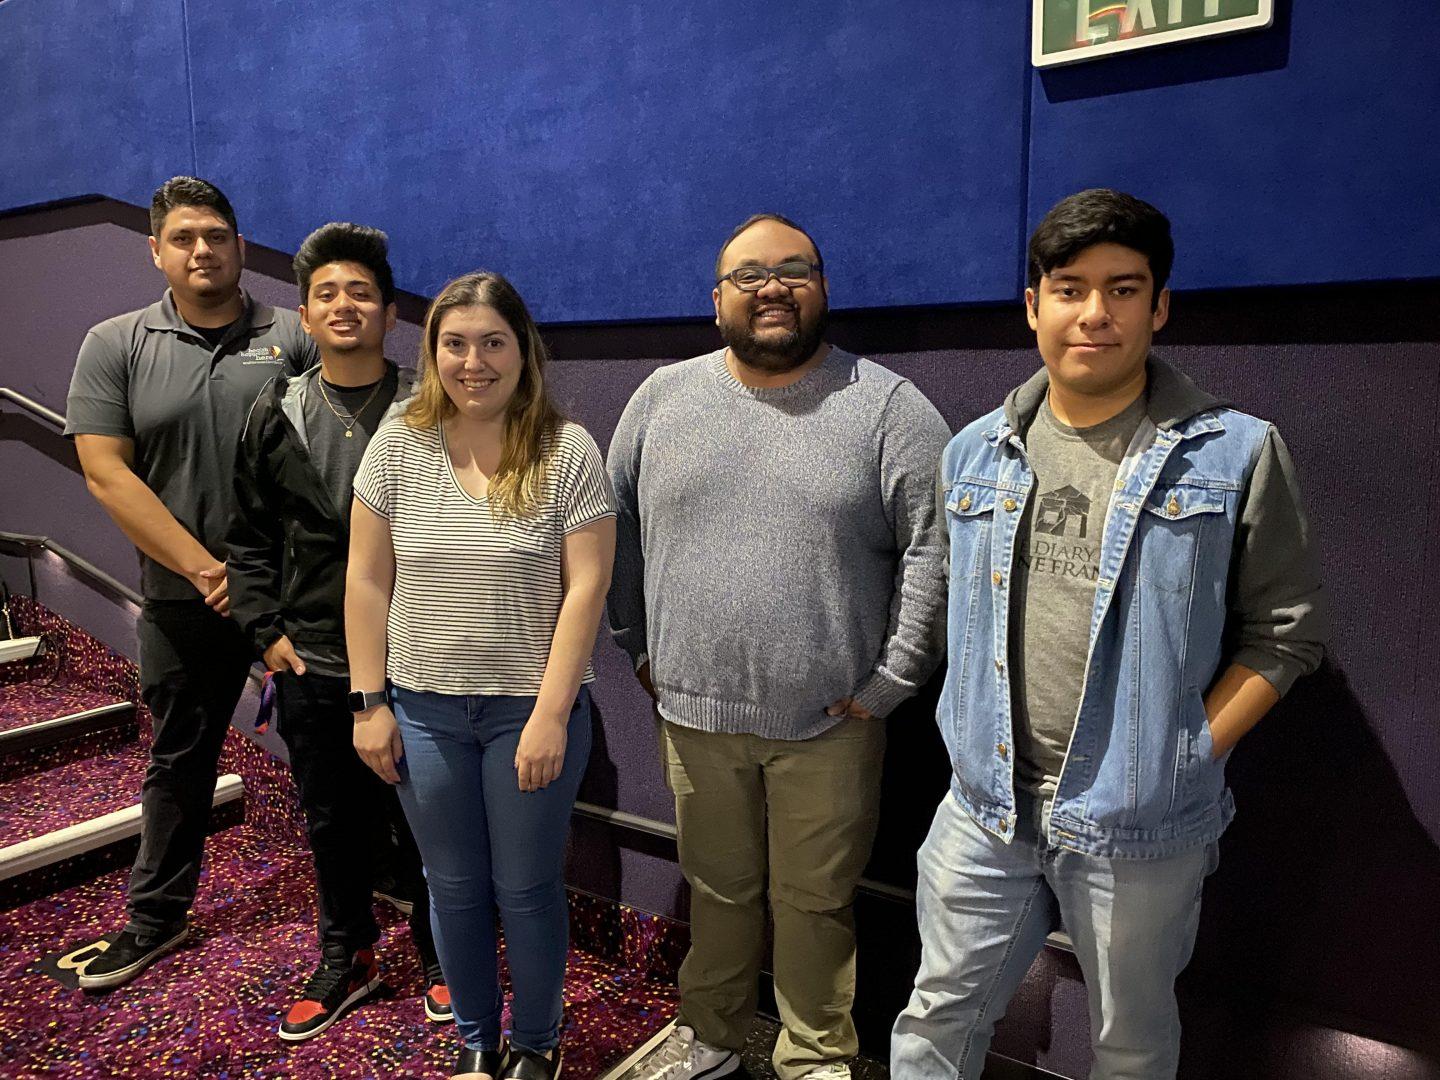 CMAC memebers attend The CMAC Voices Film Screening and Q&A show cases their  films on community health and social justice issues at the Maya Cinemas on Sunday, March 1, 2020 in Fresno, CA.
Photo by: Anjanae Freitas